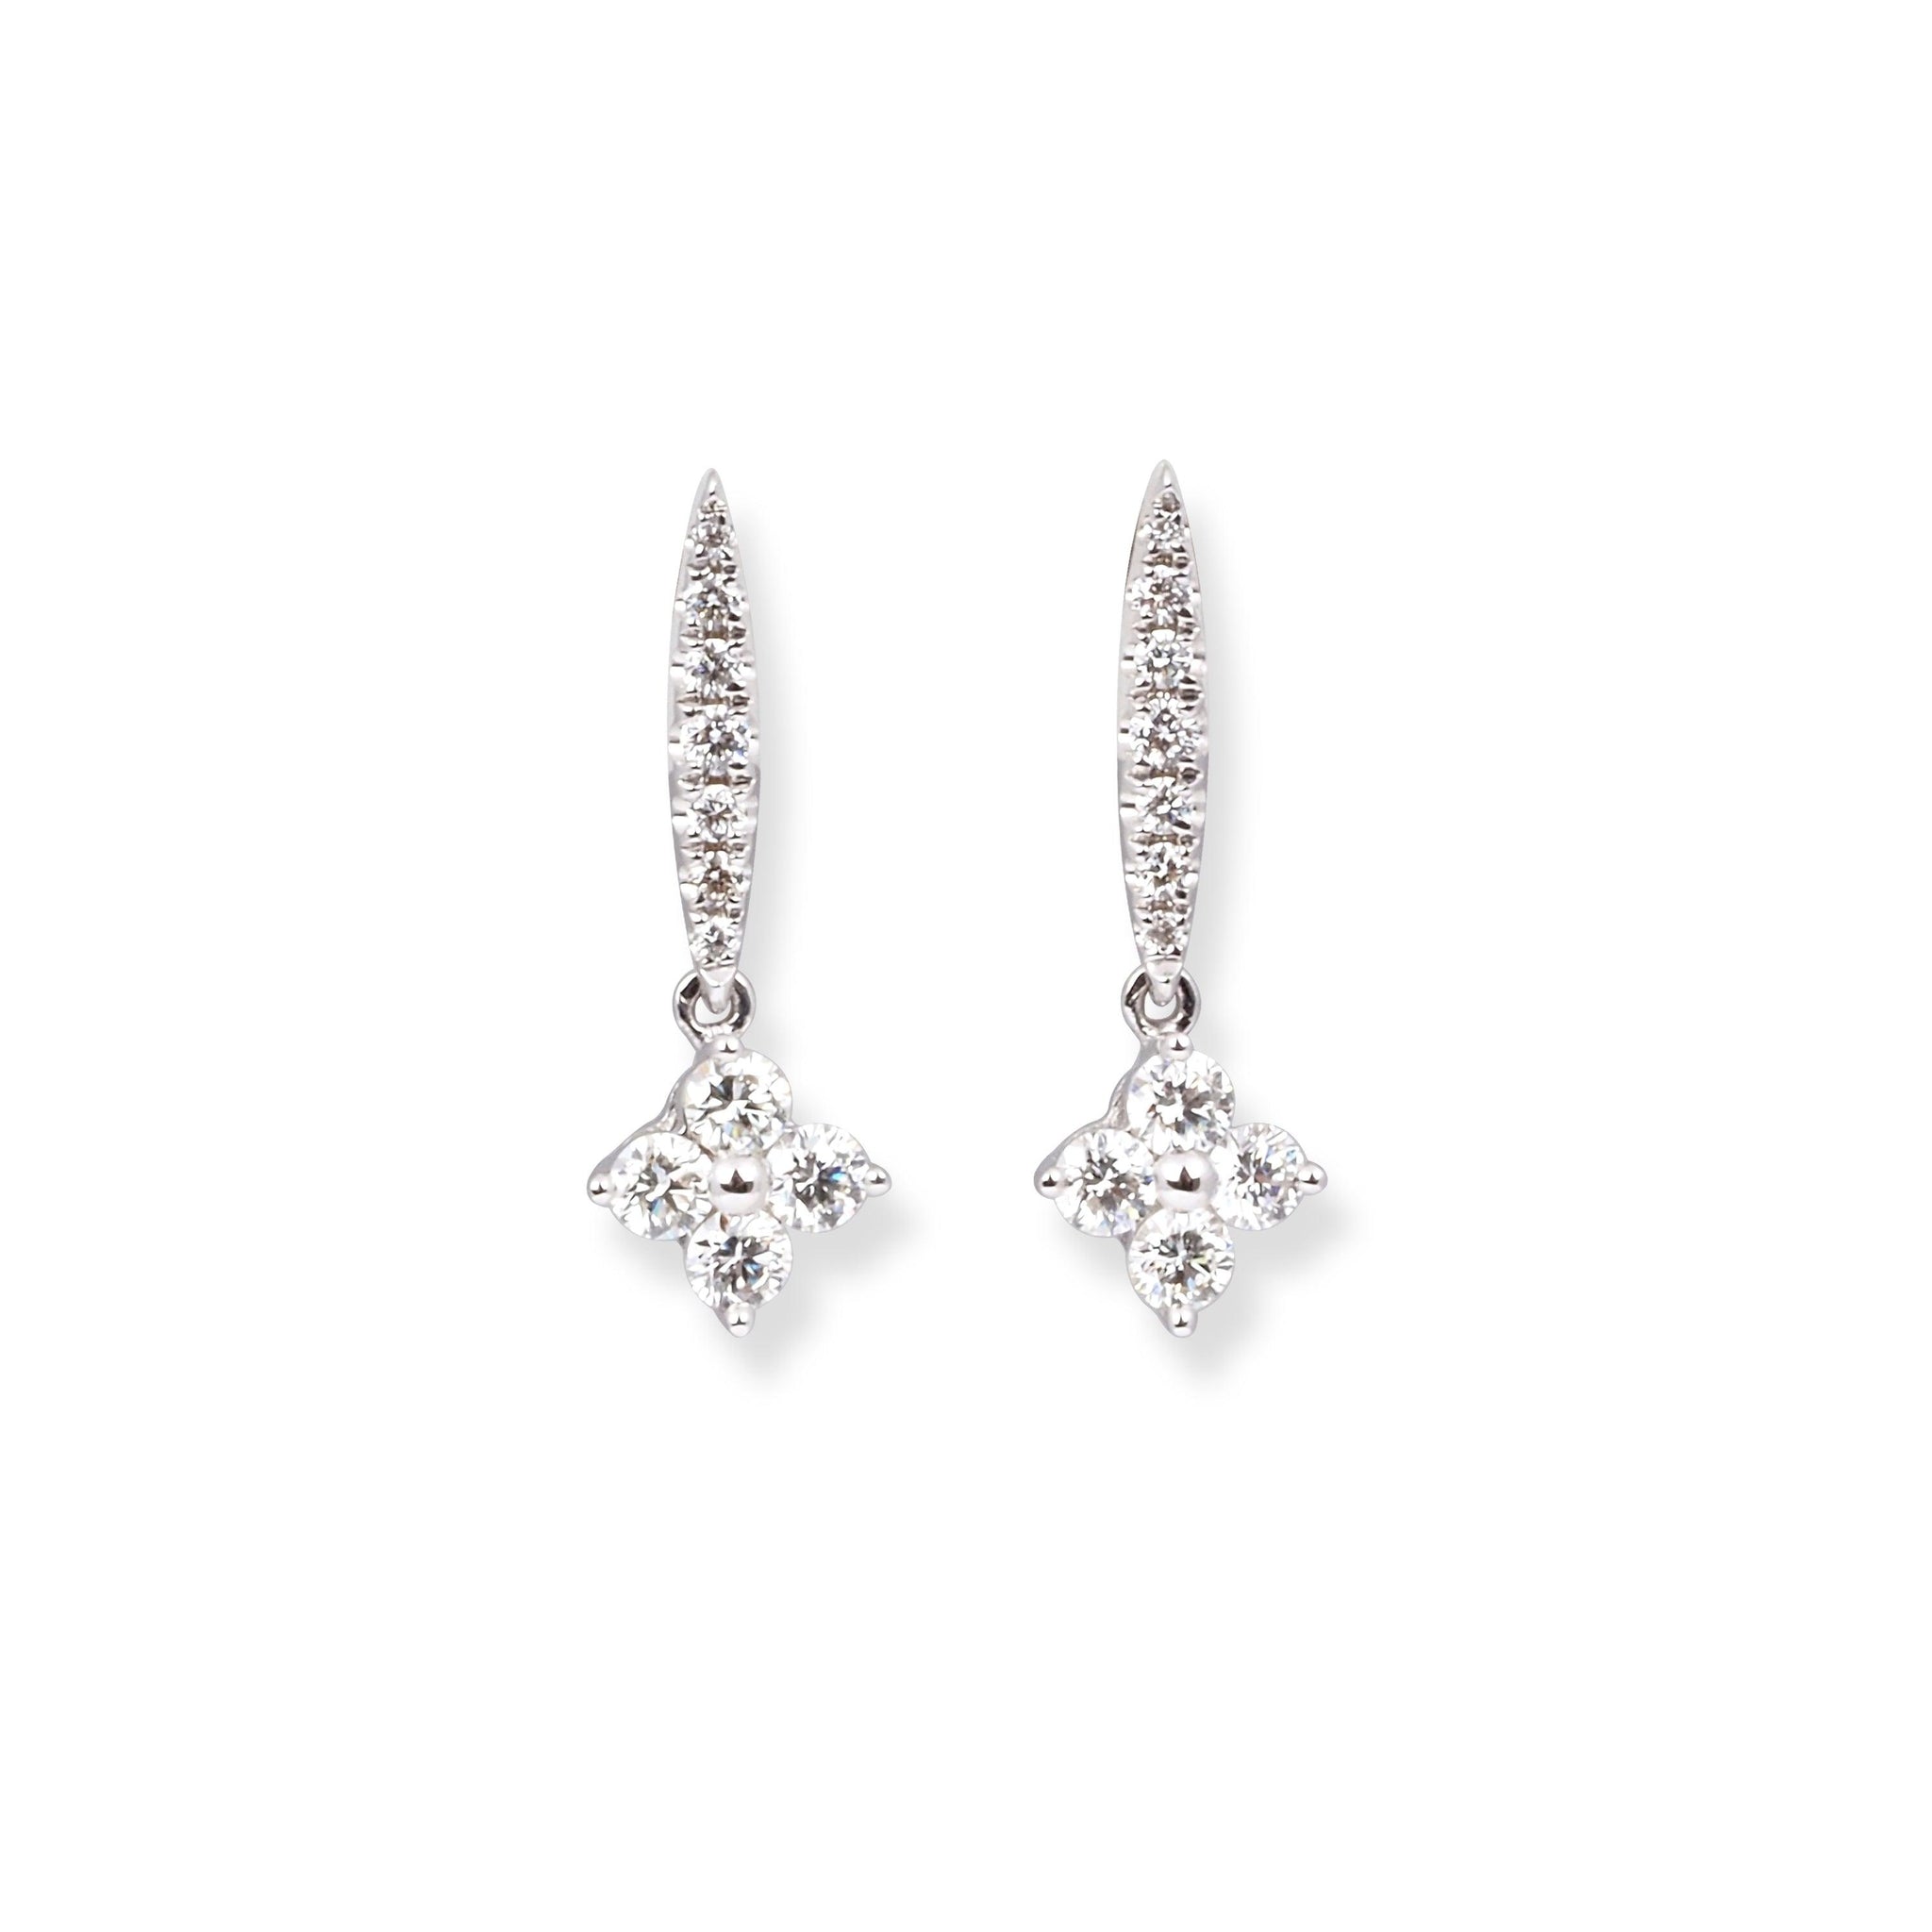 18ct White Gold Diamond Earrings with Drop Design E-7974